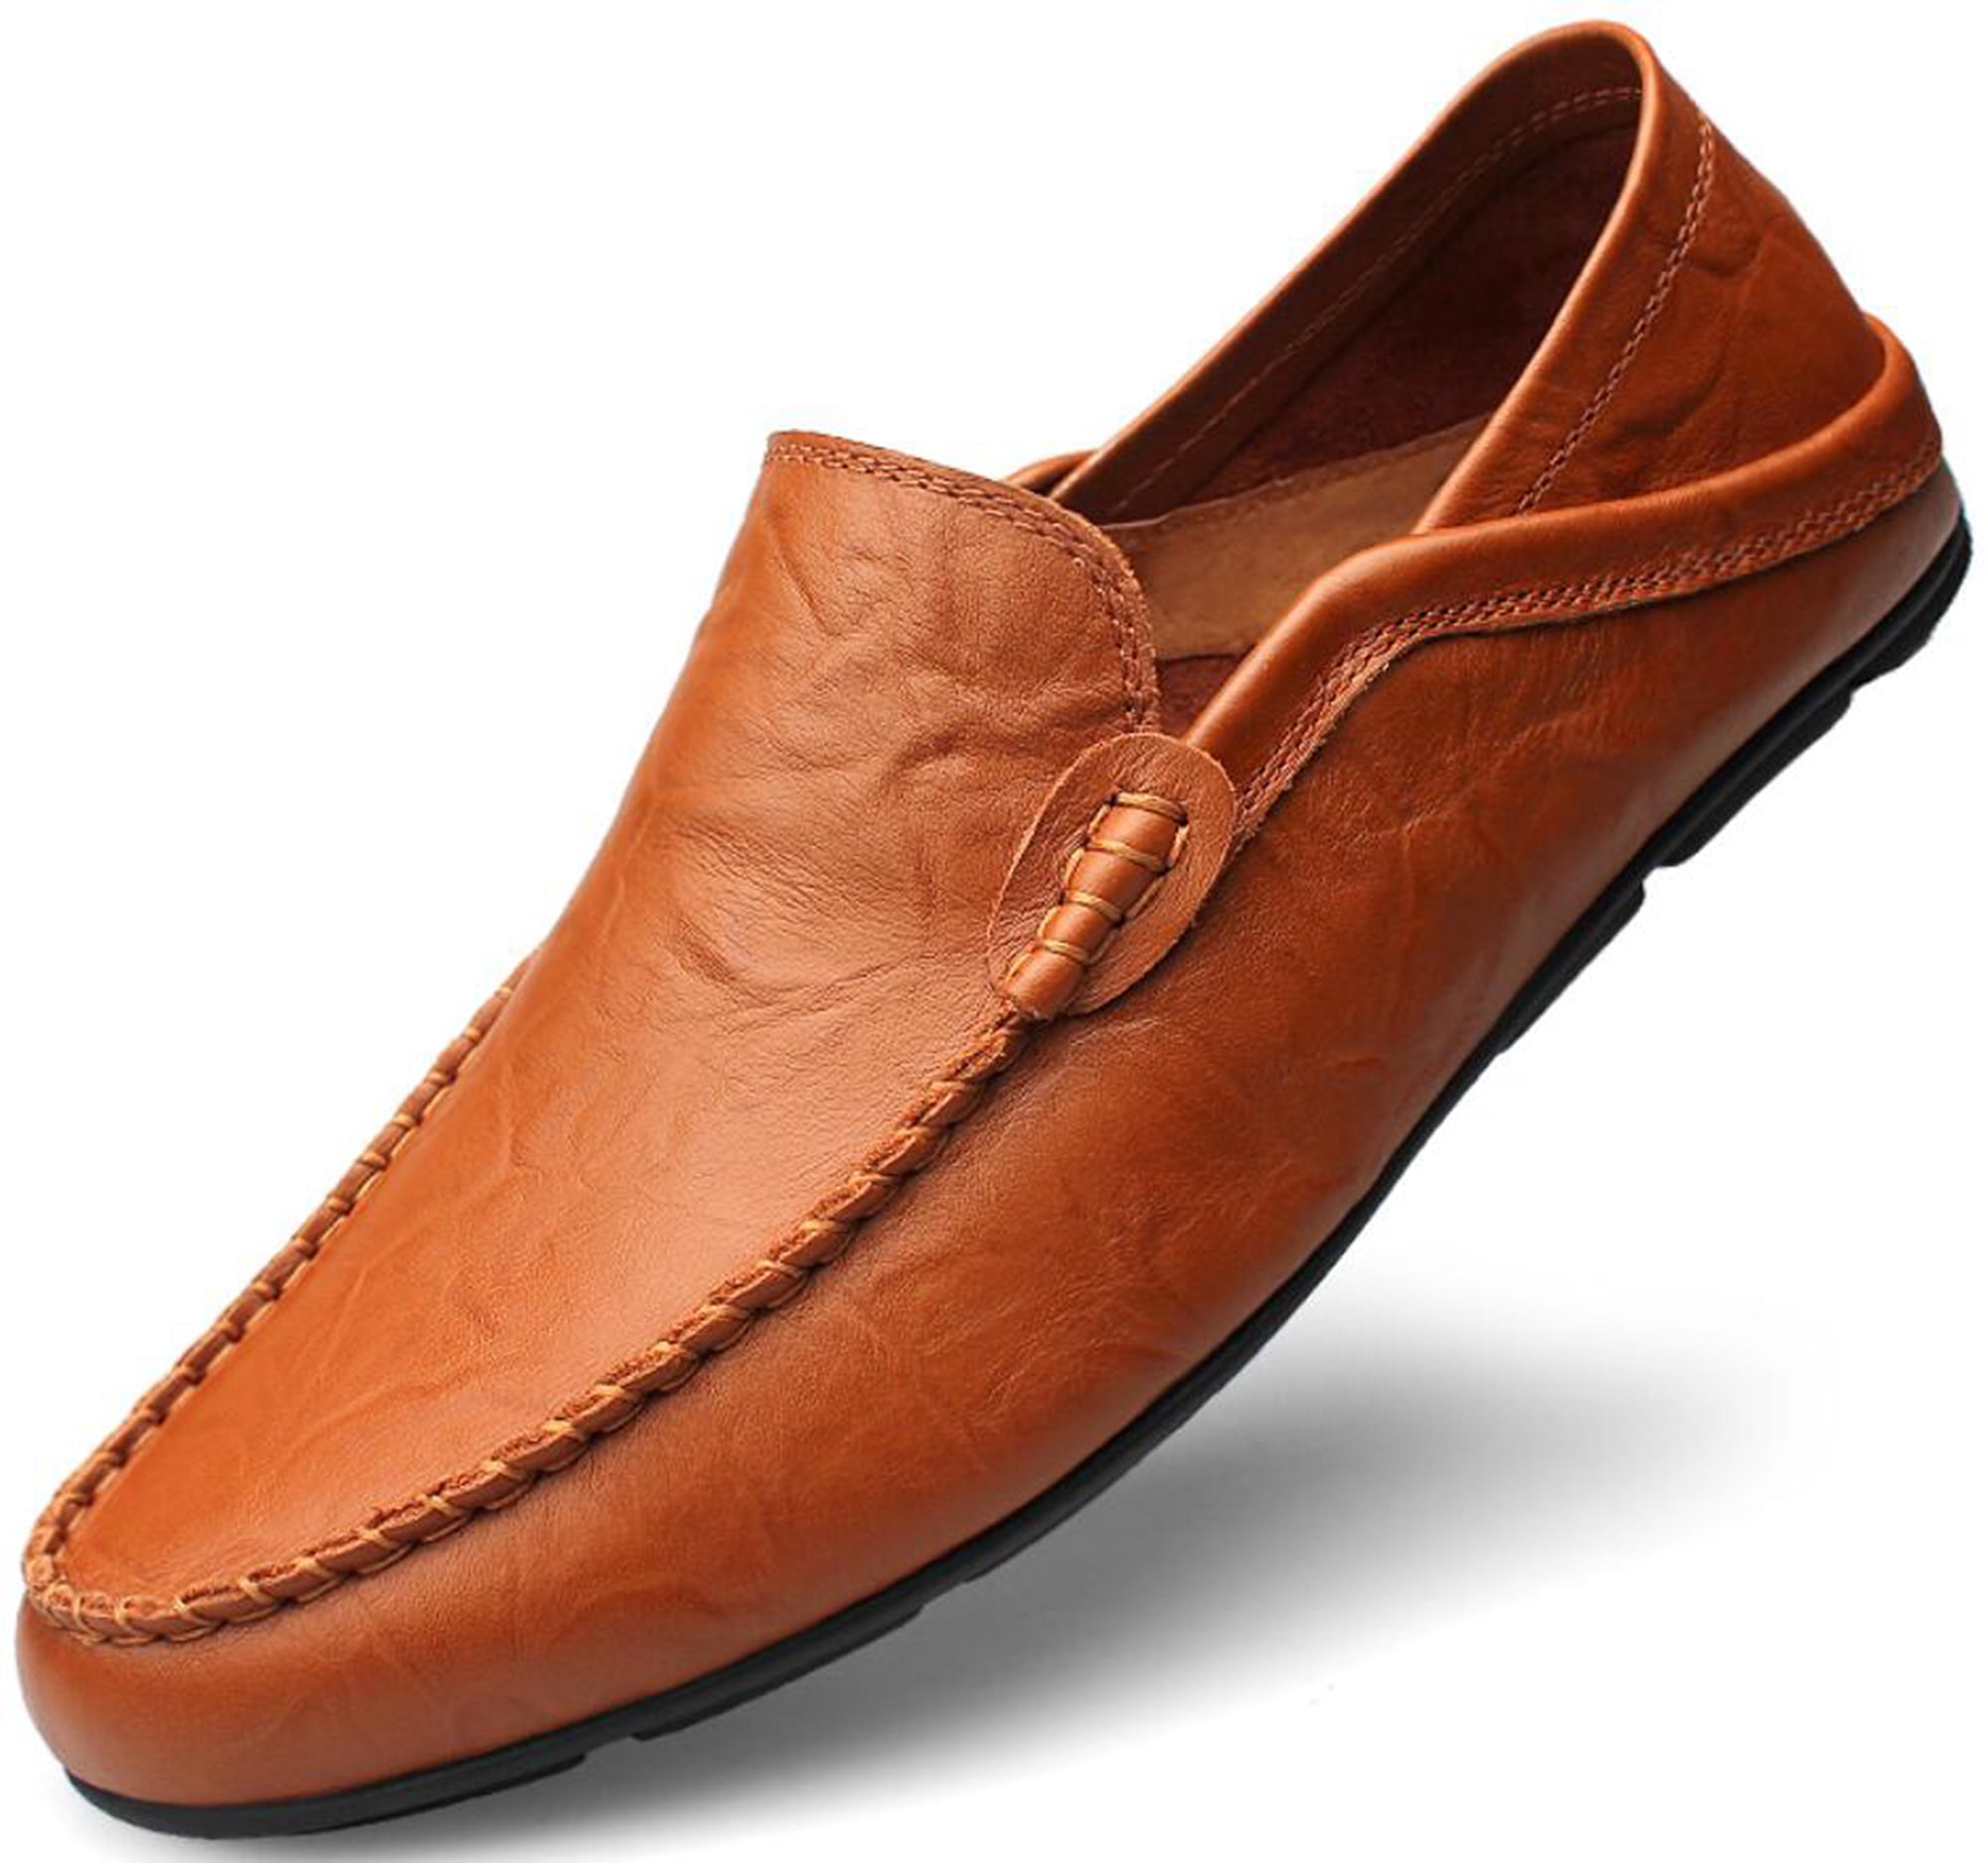 spild væk Under ~ balance Go Tour Men's Premium Genuine Hand-made Leather Casual Slip on Loafers  Breathable Driving Shoes Fashion Slipper A Brown 11/47 - Walmart.com